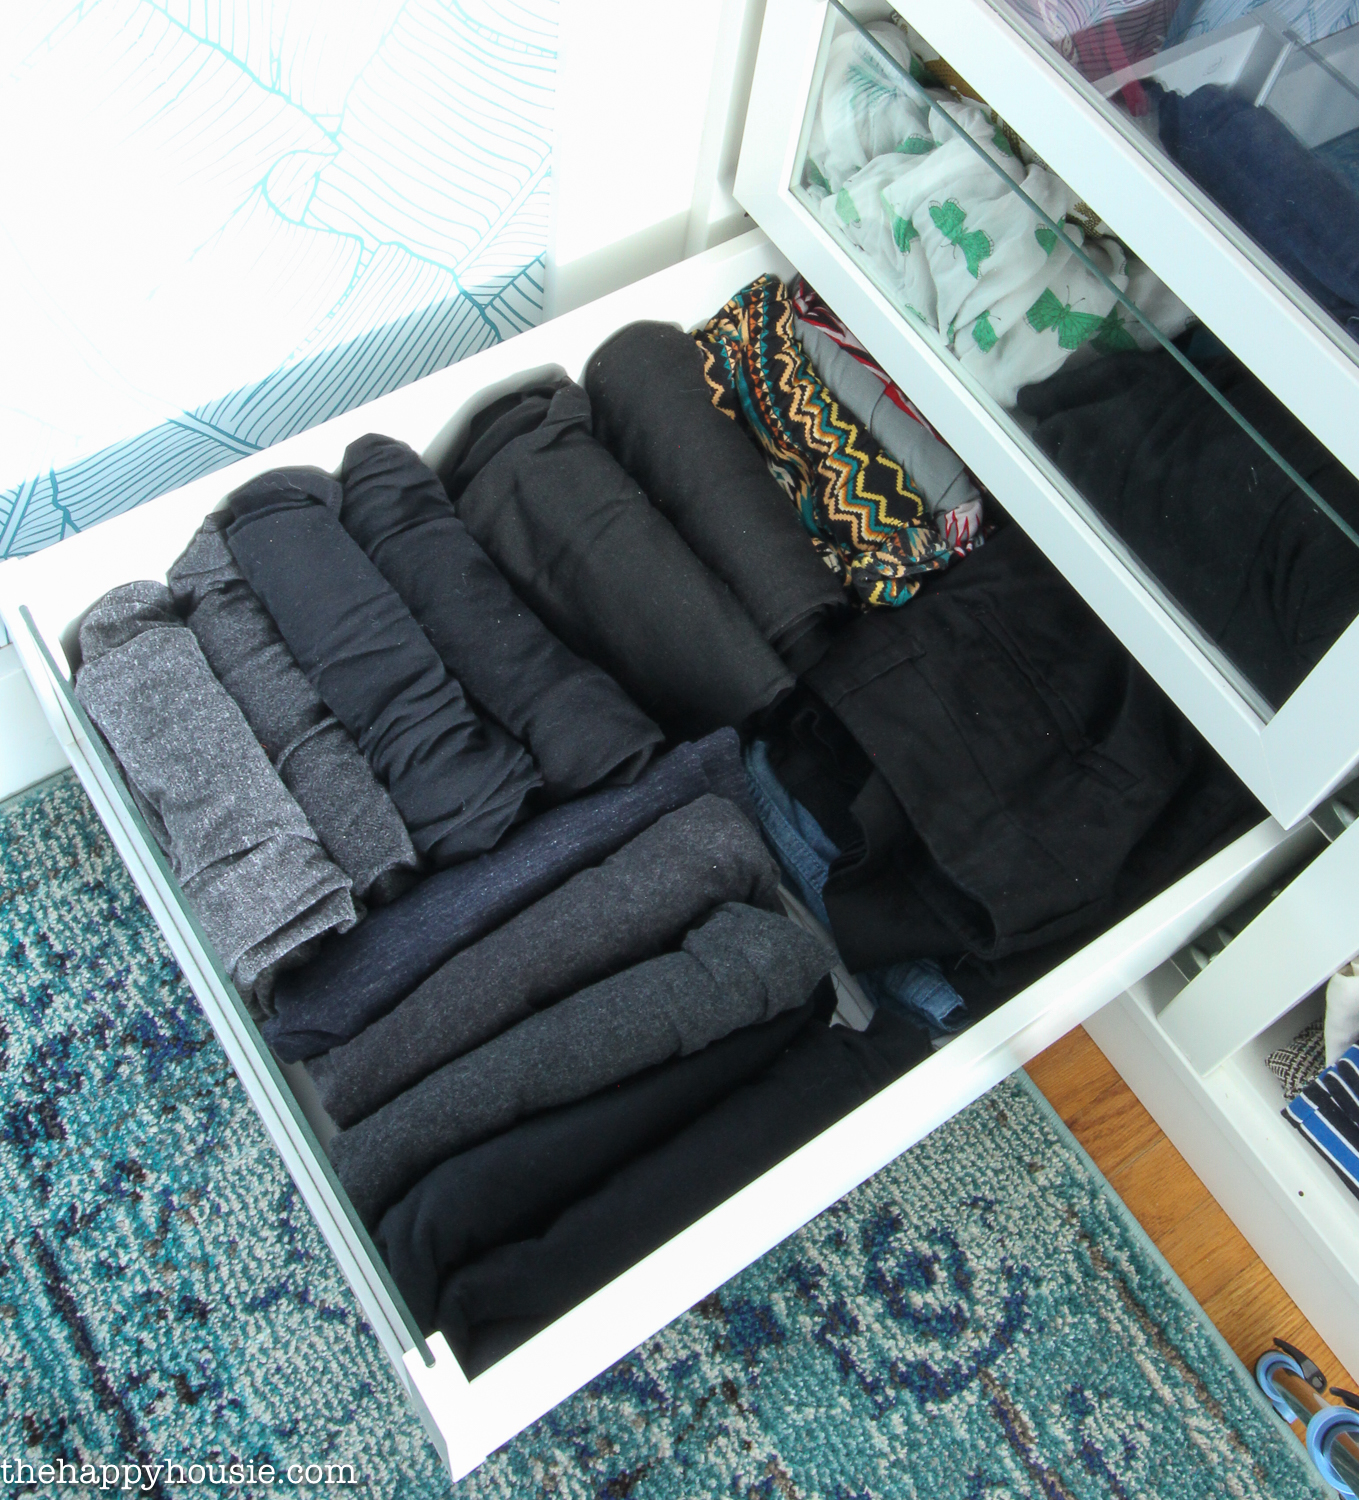 A drawer filled with rolled up clothing items.